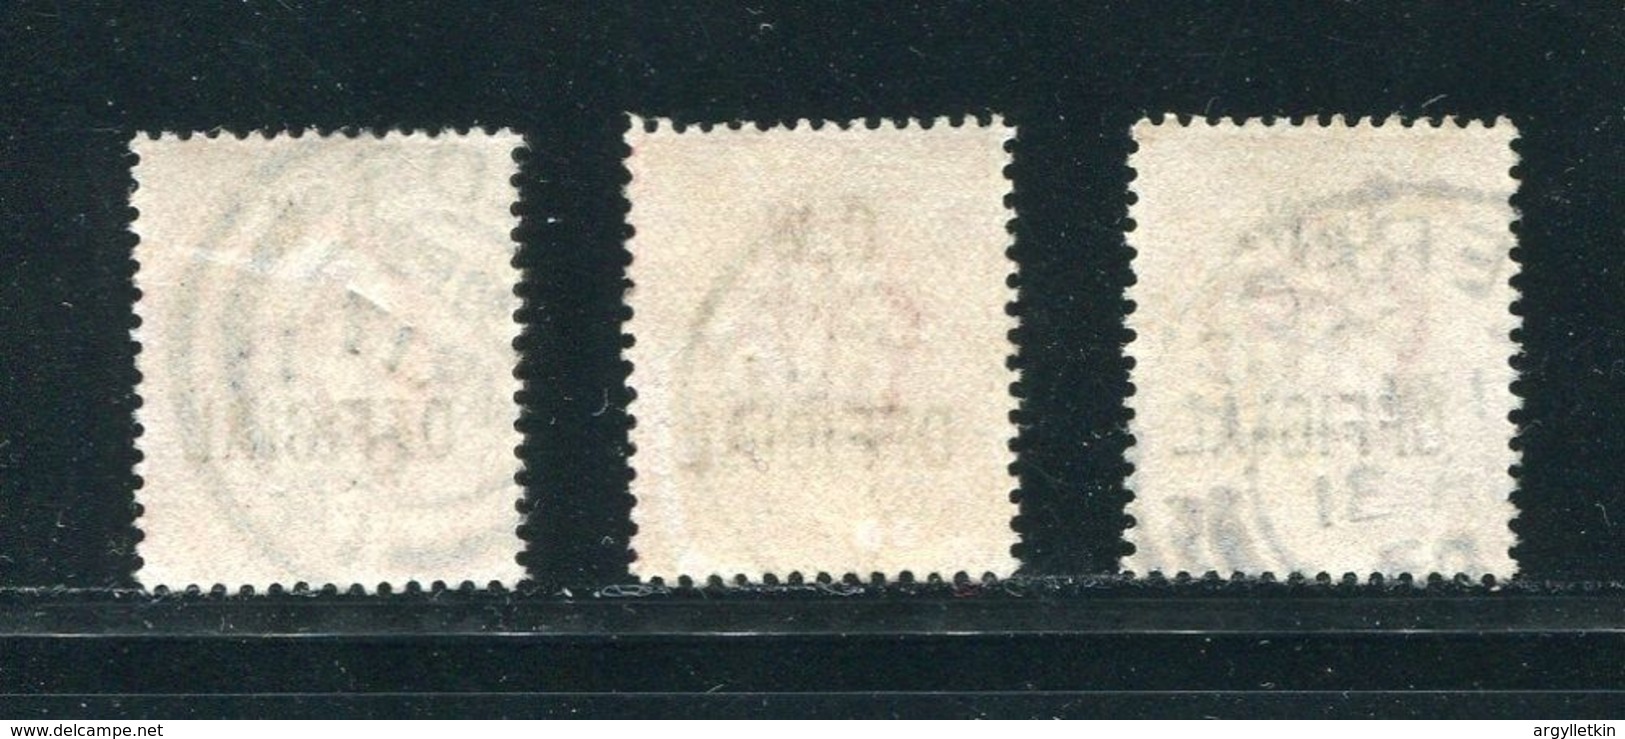 GB KING EDWARD 7TH OFFICIAL STAMPS O.W. OFFICIAL LEEDS LIVERPOOL - Zonder Classificatie